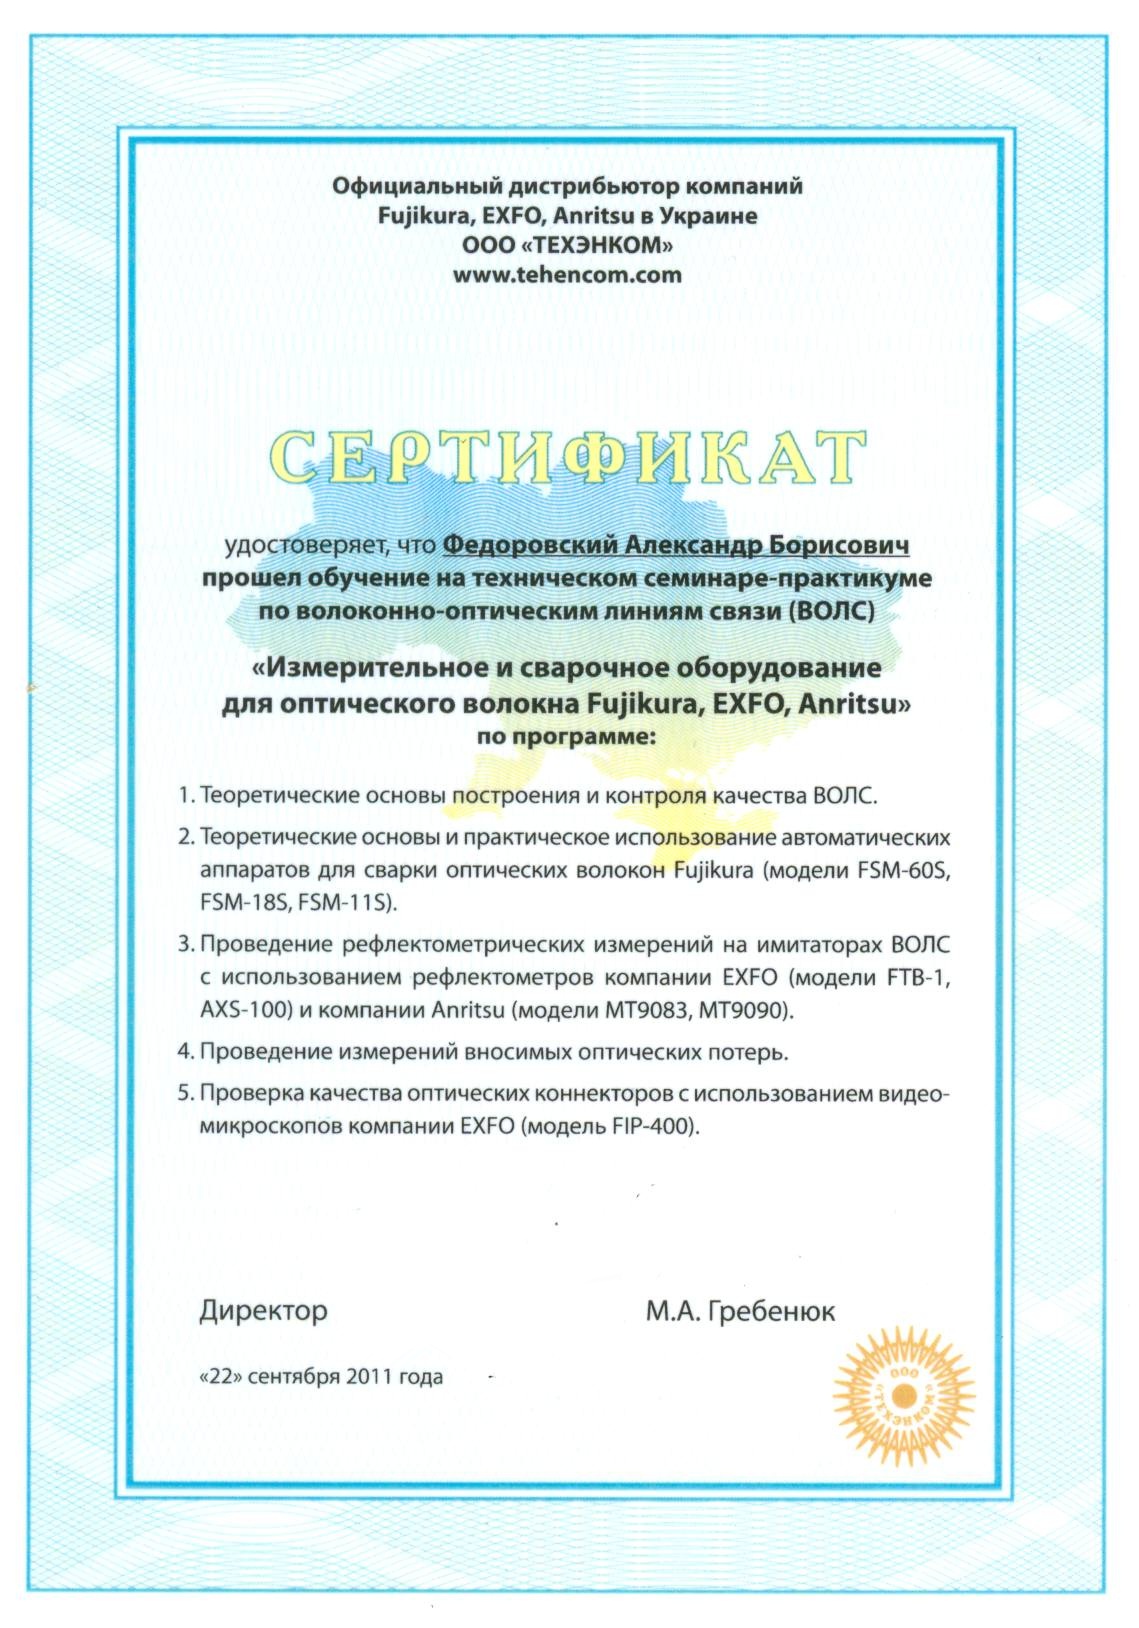 An example of a training certificate at Tehencom company